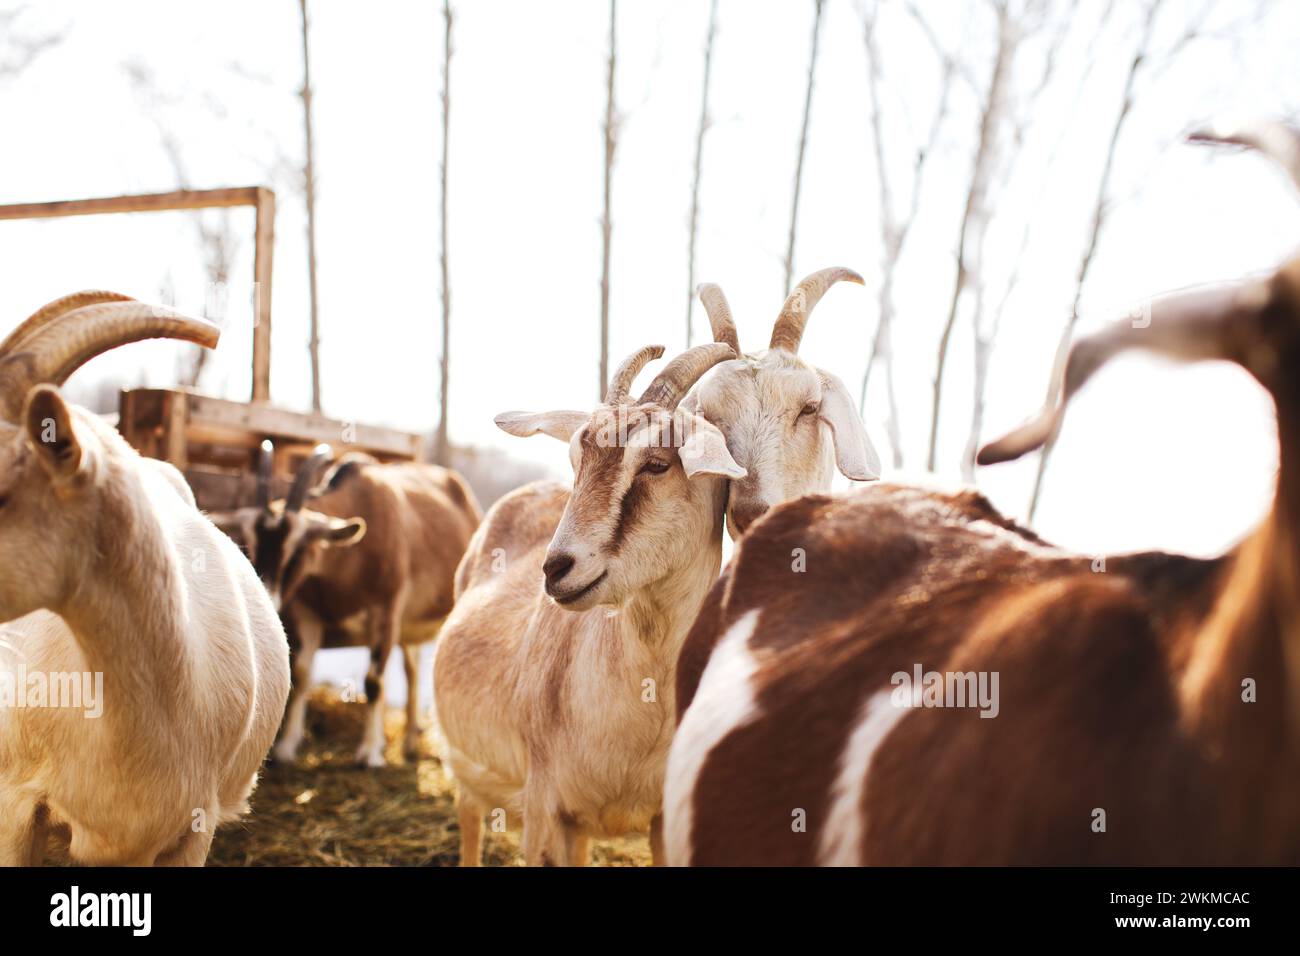 A group of goats standing together, gazing off to the side Stock Photo